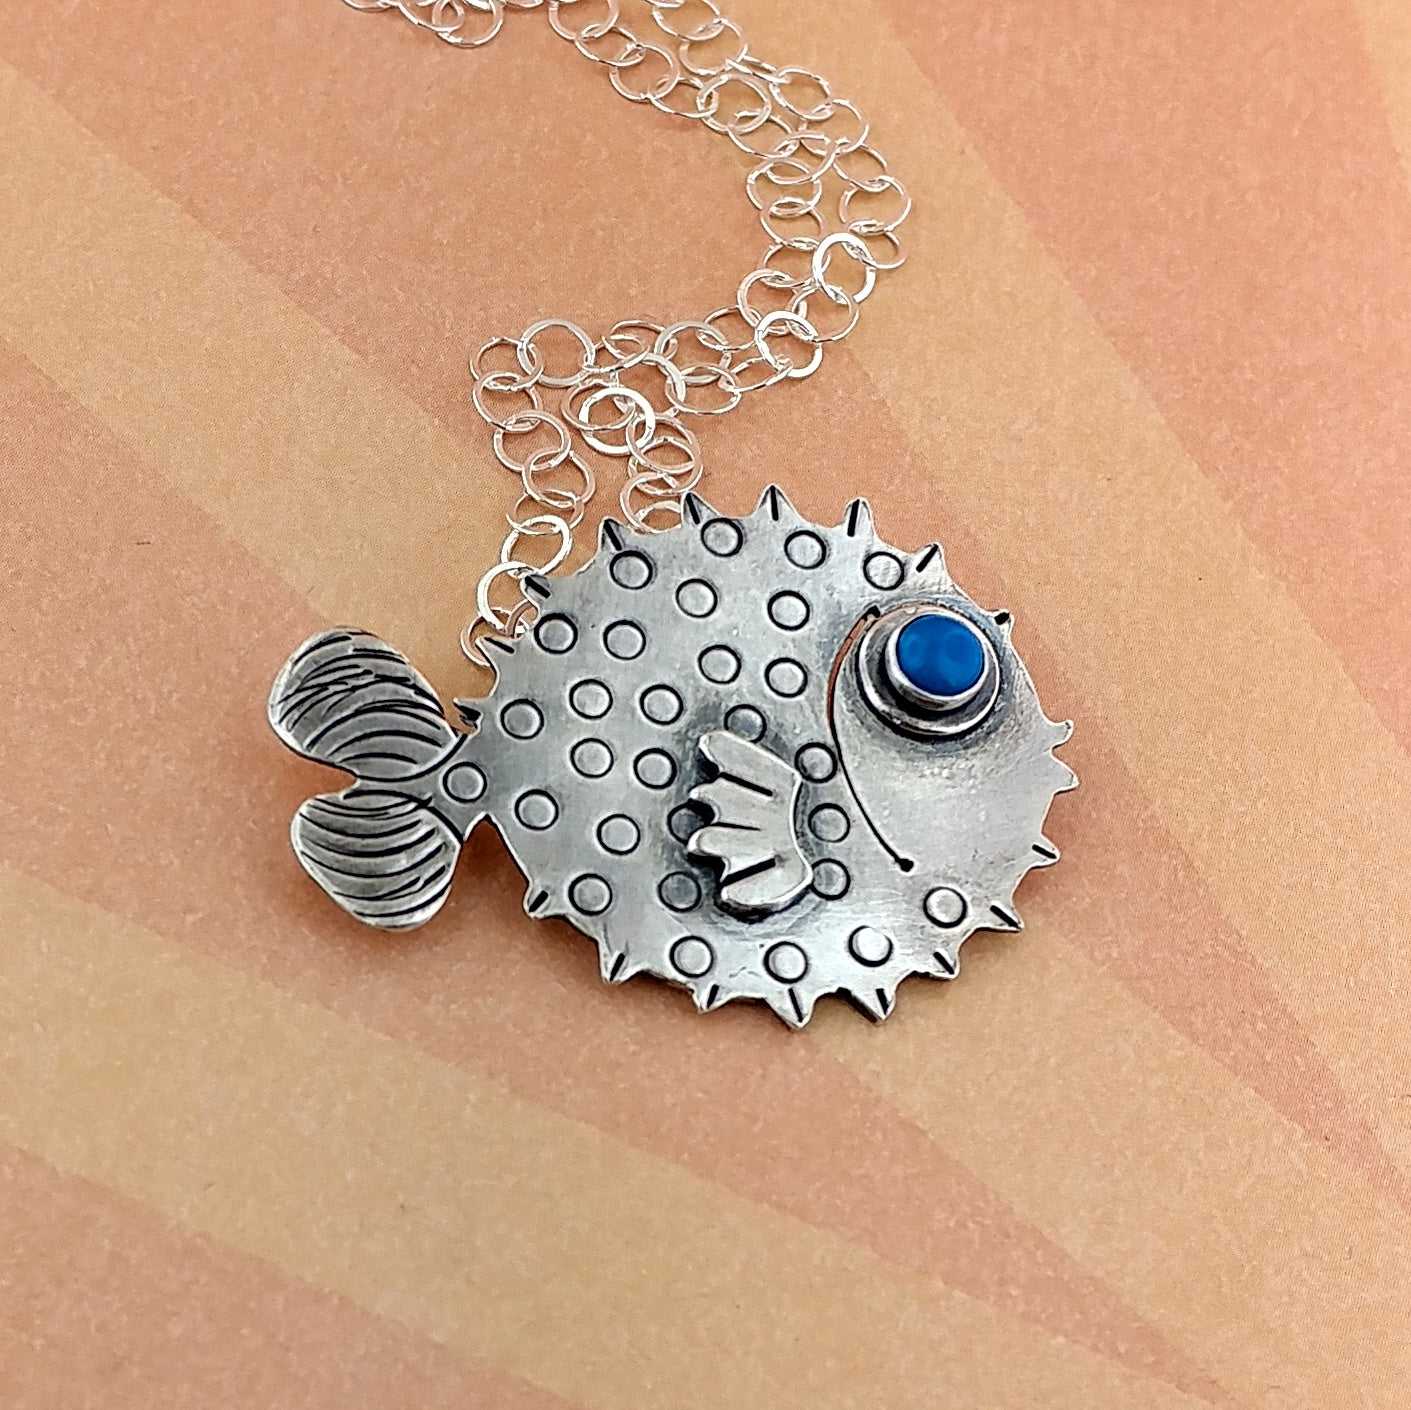 Puffer fish with gemstone eye made of sterling silver.